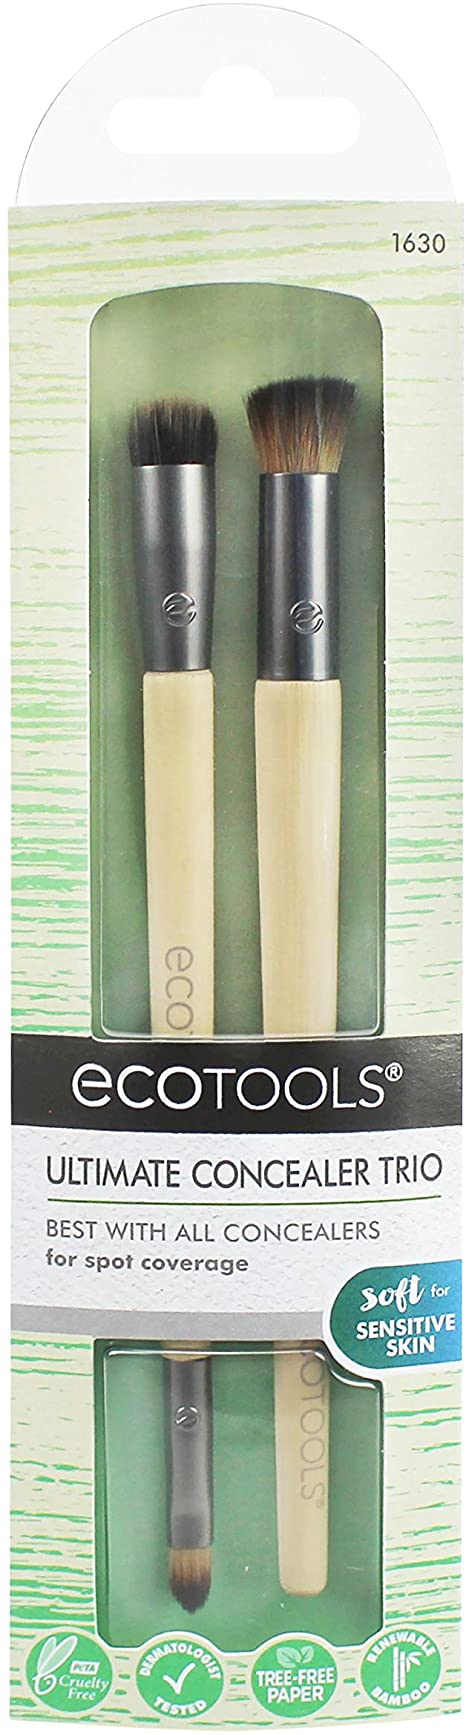 ECOTOOLS Ultimate Concealer Duo Brush Set.